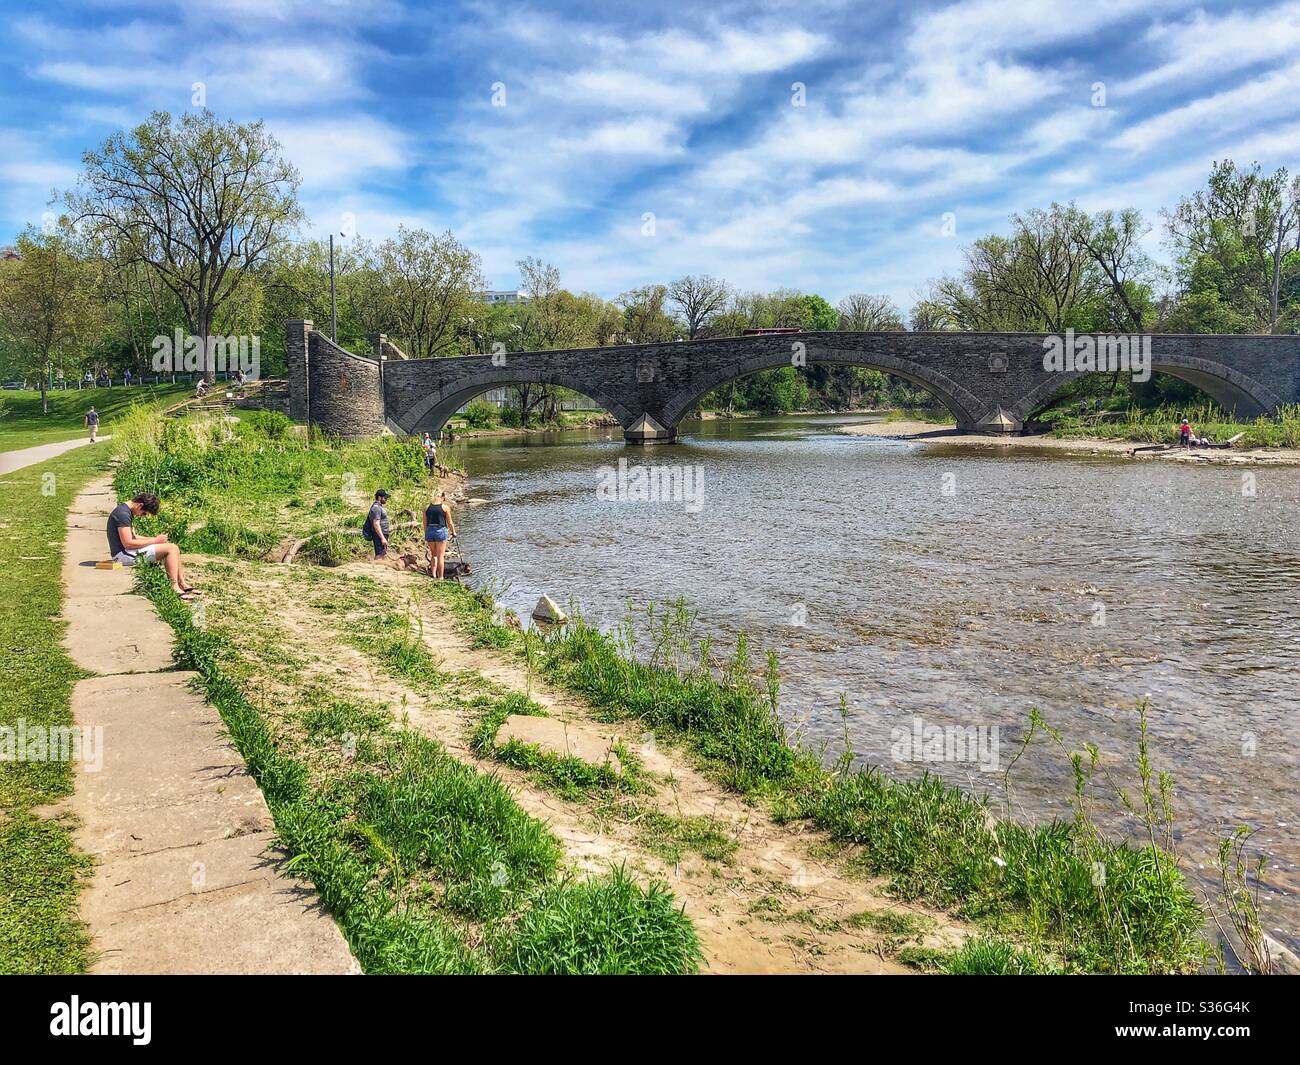 The Humber River in Toronto, Canada. Stock Photo